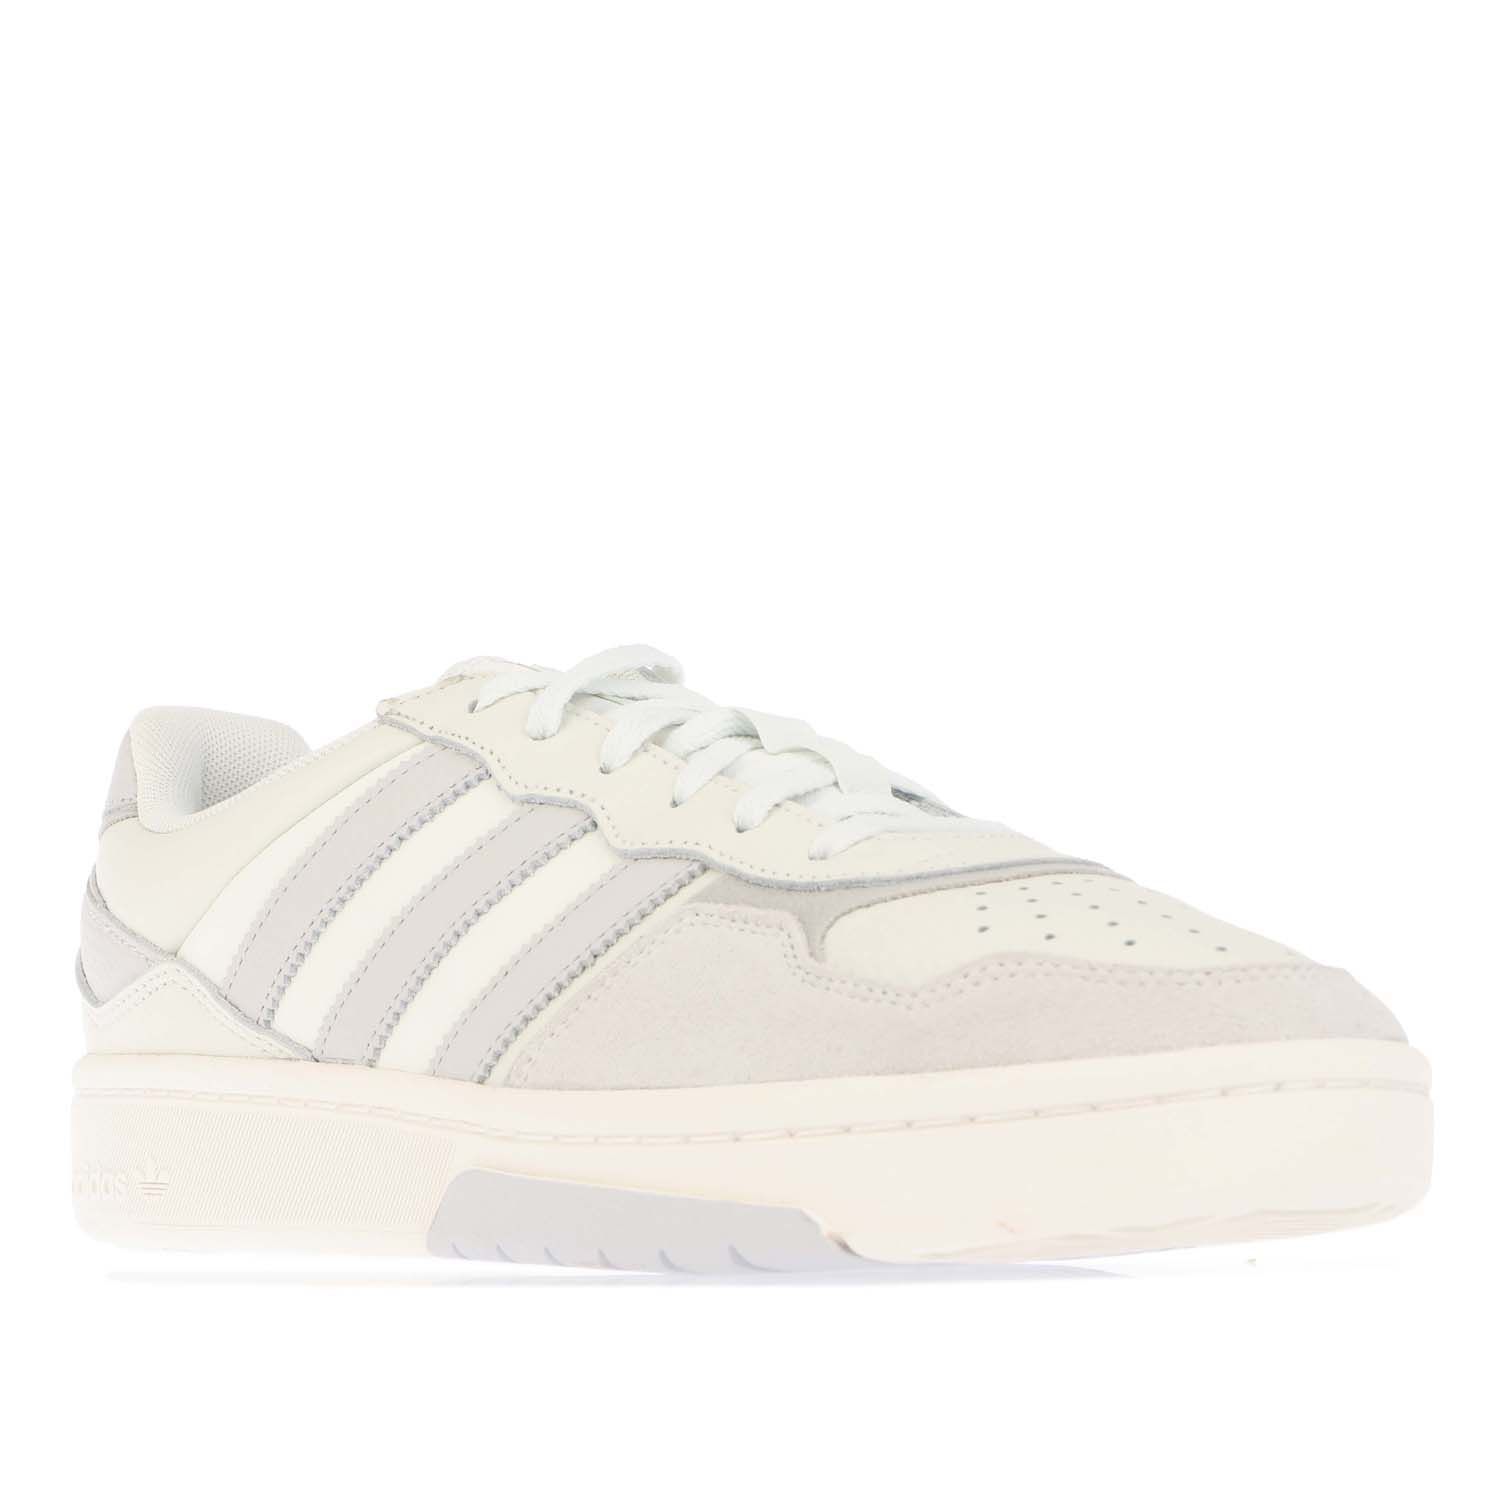 Mens adidas Originals Courtic Trainers in off white.- Leather upper.- Lace closure.- Regular fit.- Serrated 3-Stripes.- Textile lining.- Rubber outsole.- Ref: GY3591